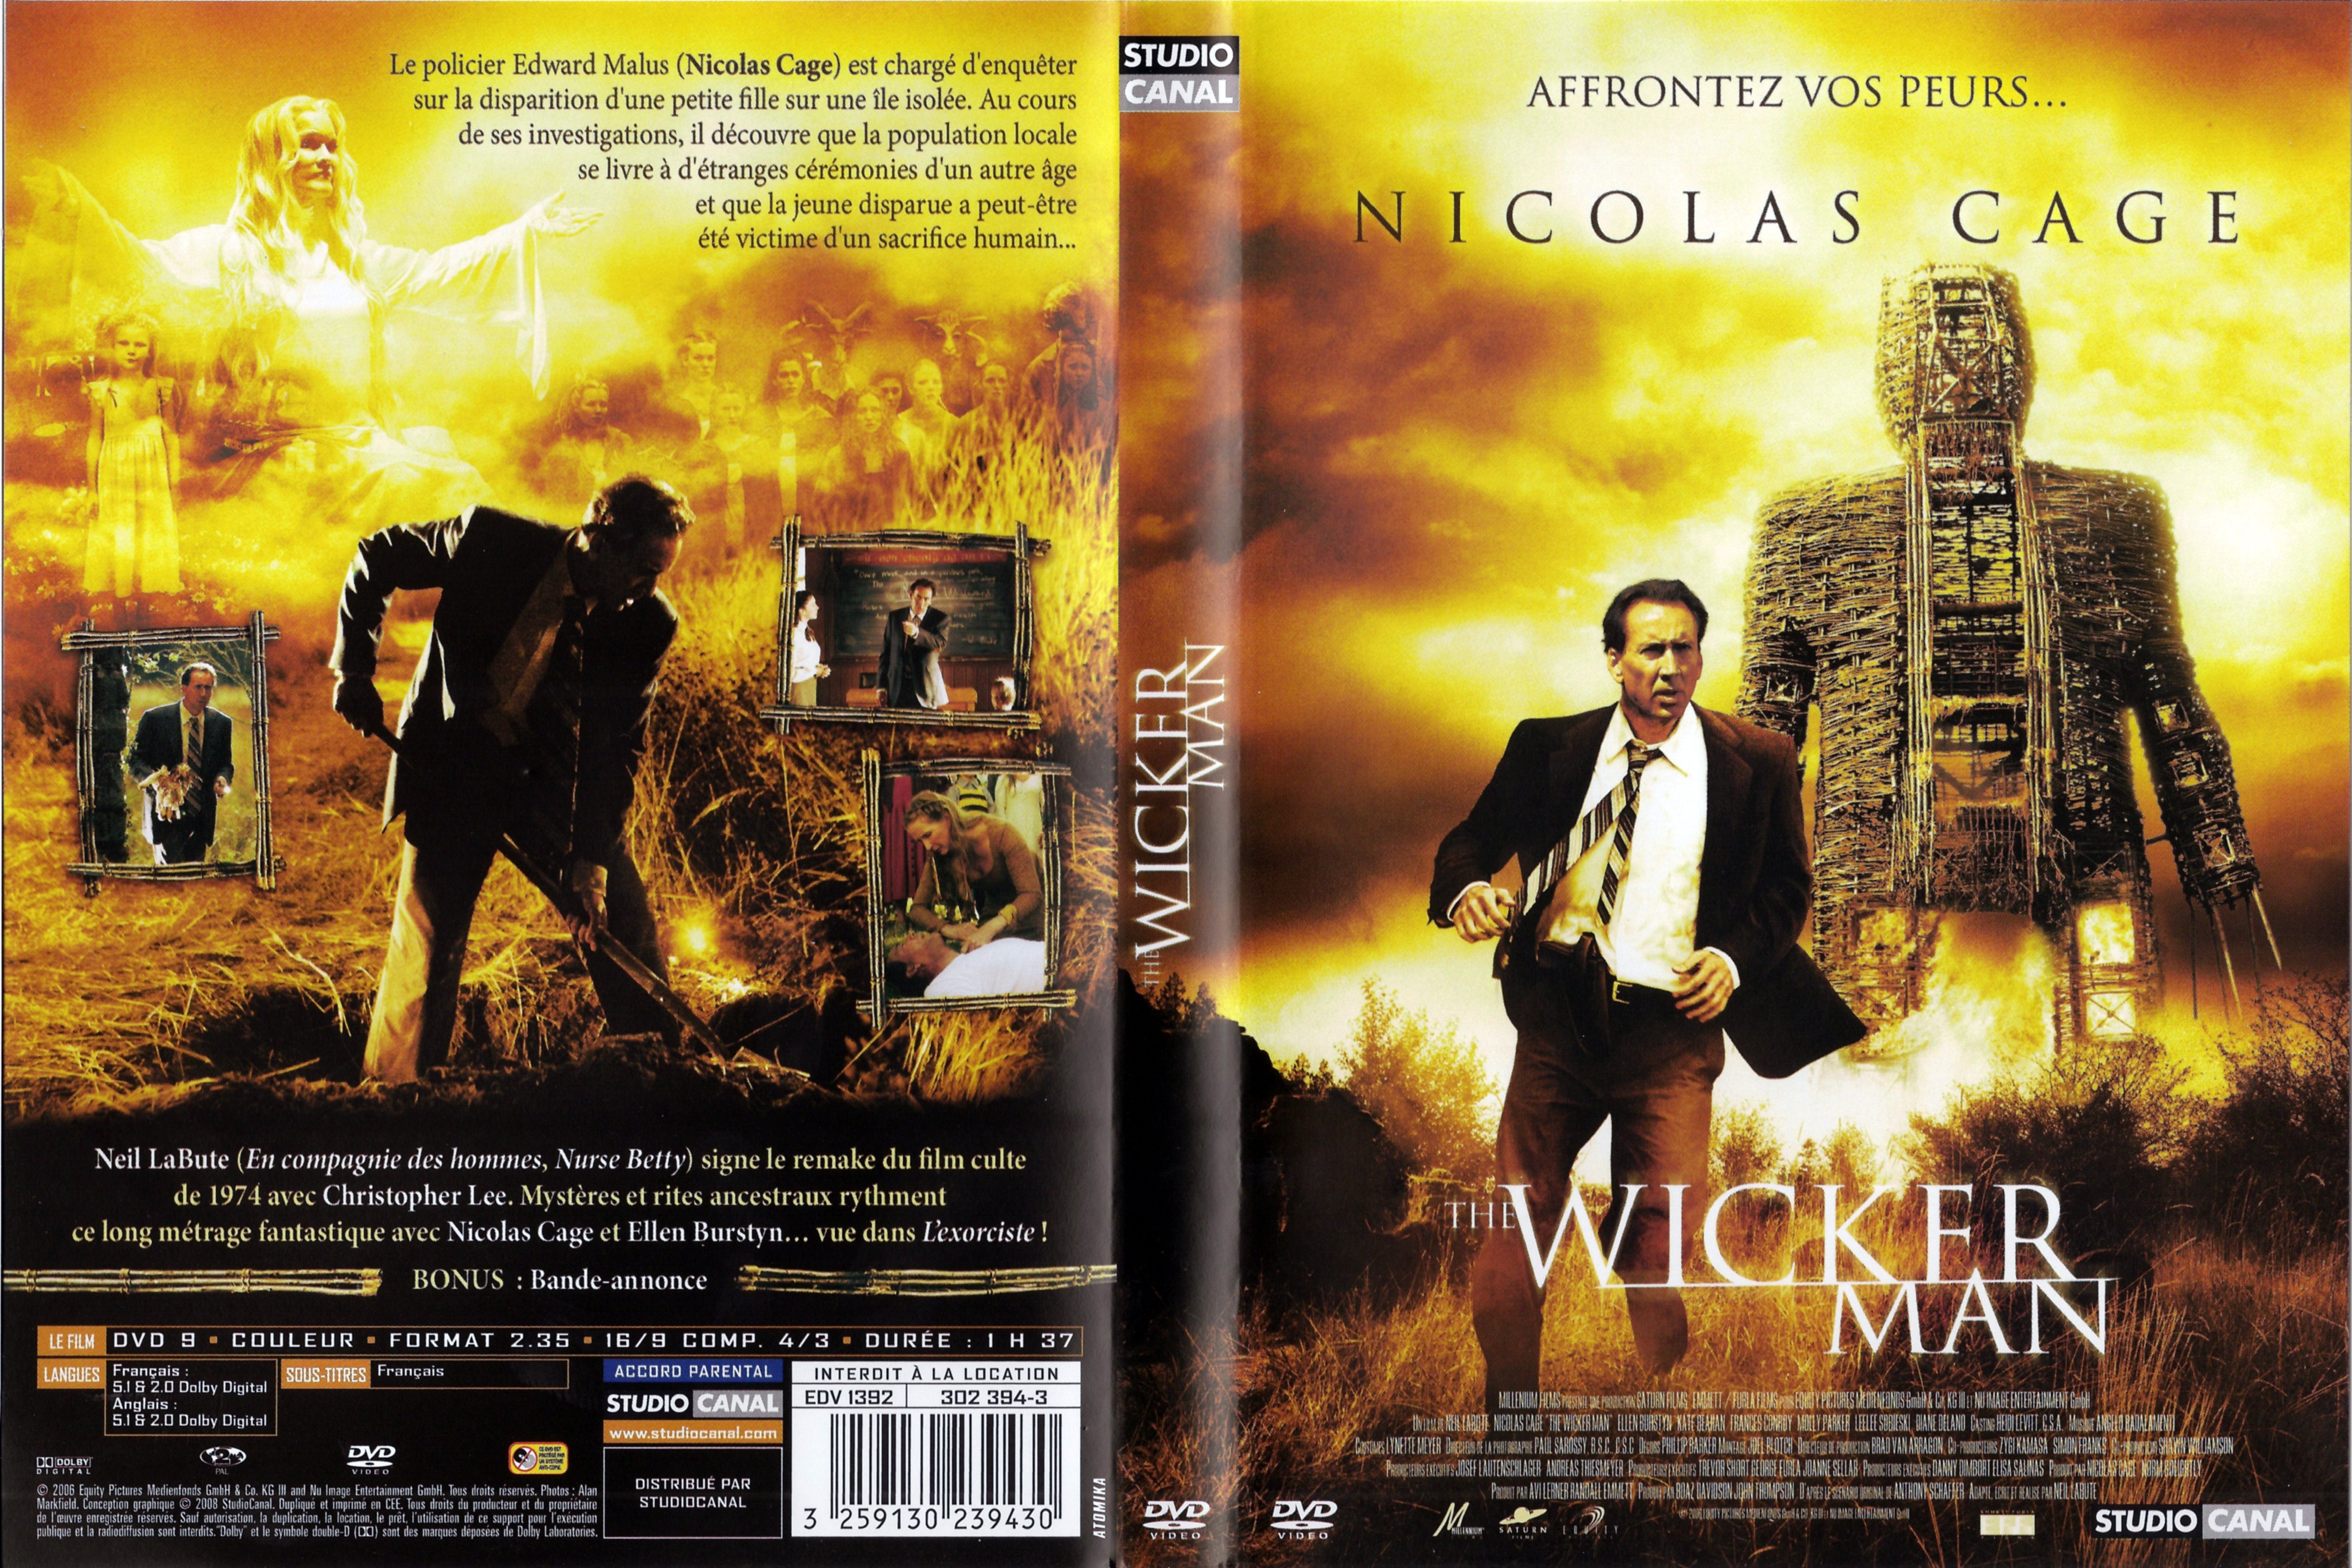 Jaquette DVD The wicker man (2006) v2